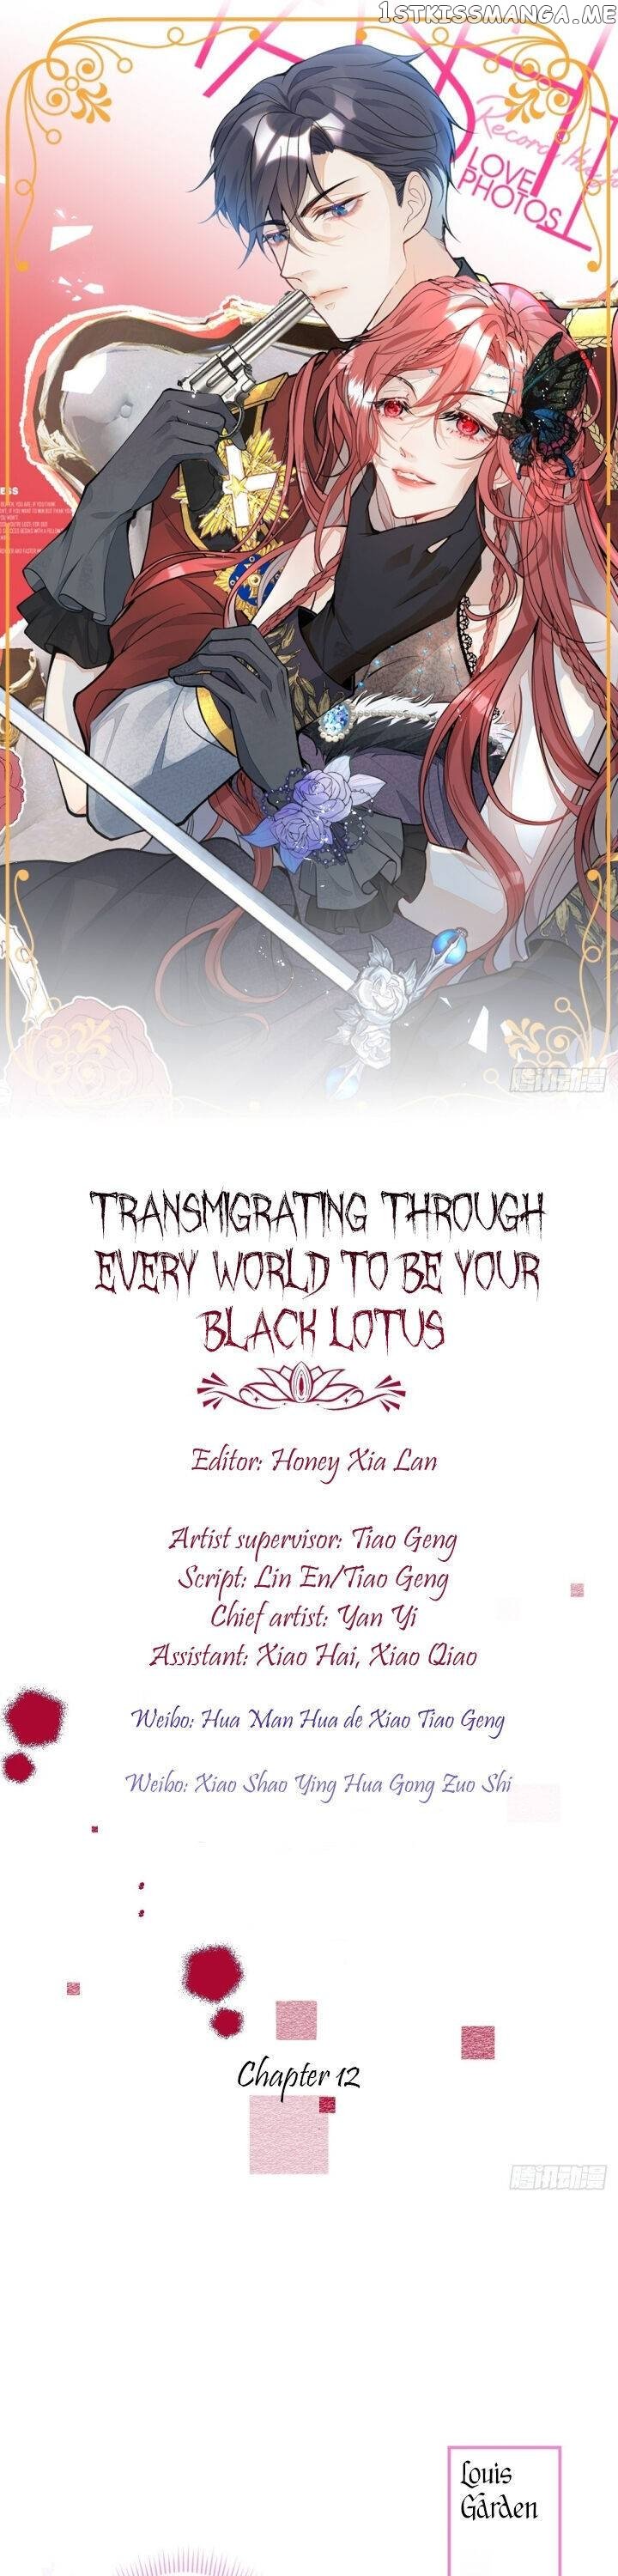 Transmigrating Through Every World To Be Your Black Lotus chapter 12